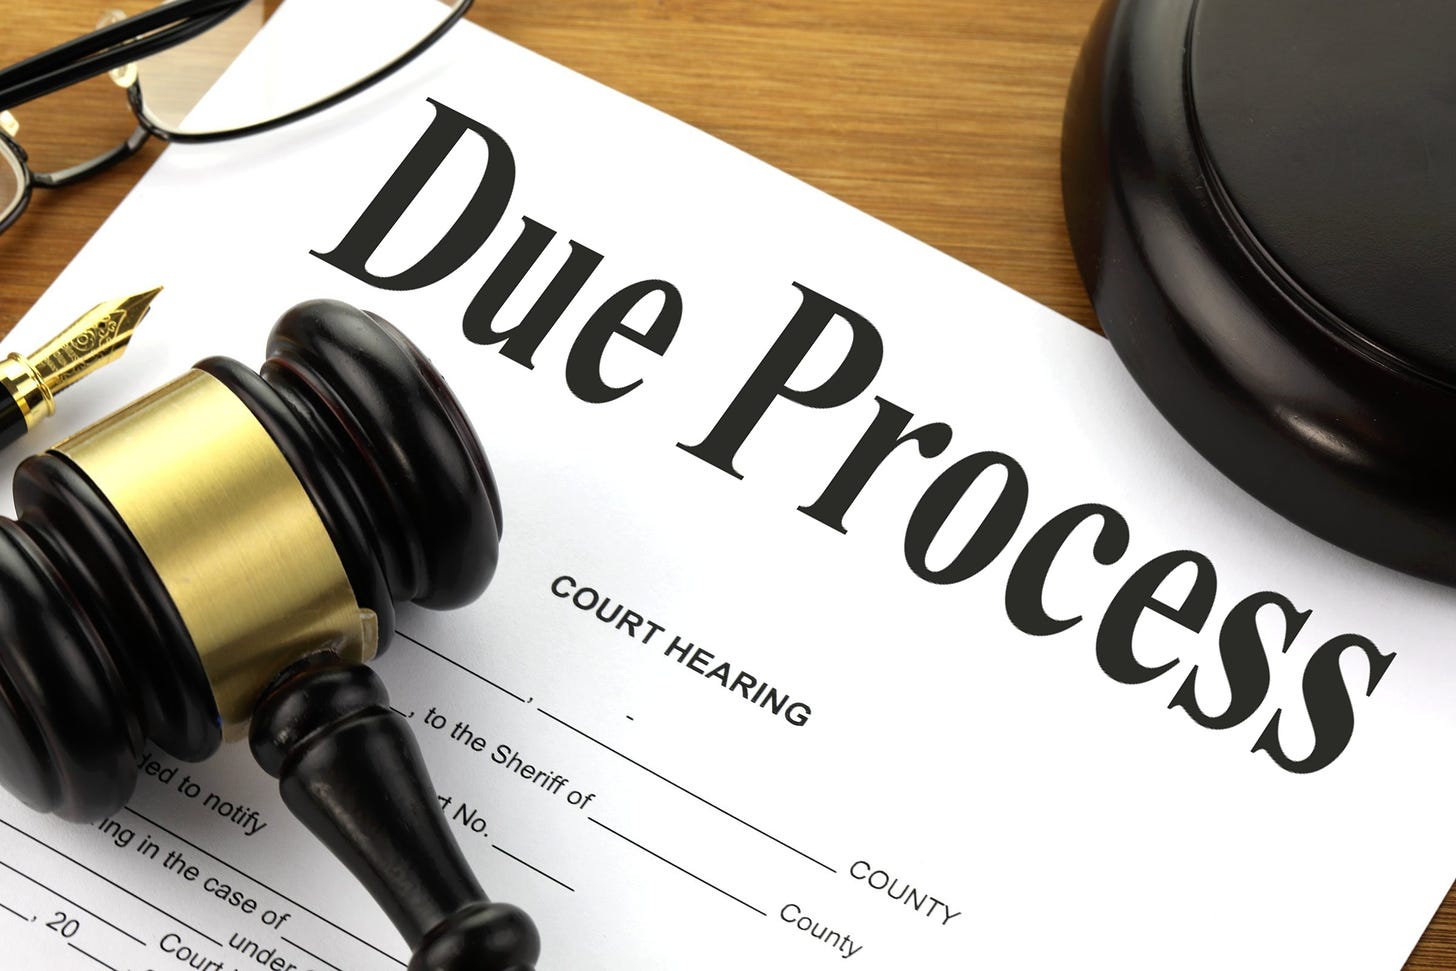 Due Process - Free of Charge Creative Commons Legal 1 image